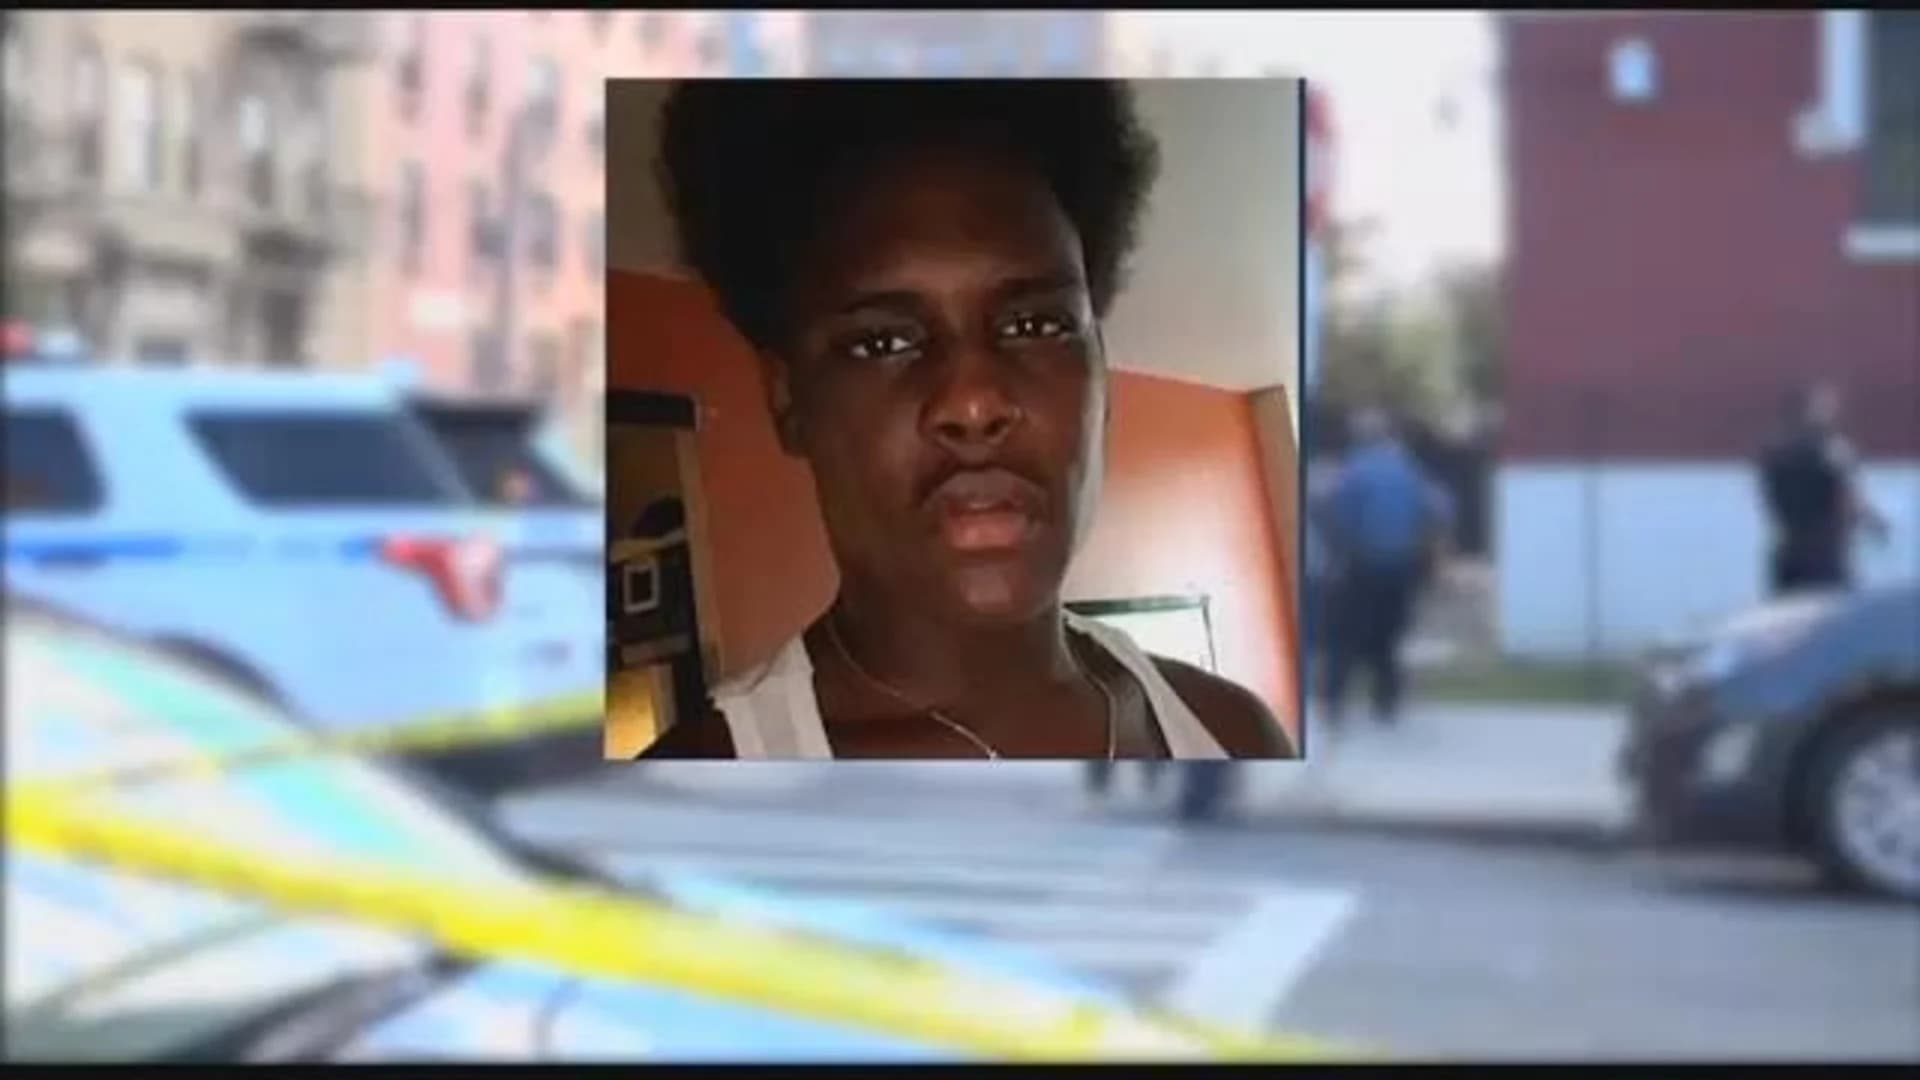 New video could be critical evidence in fatal Bronx HS stabbing case